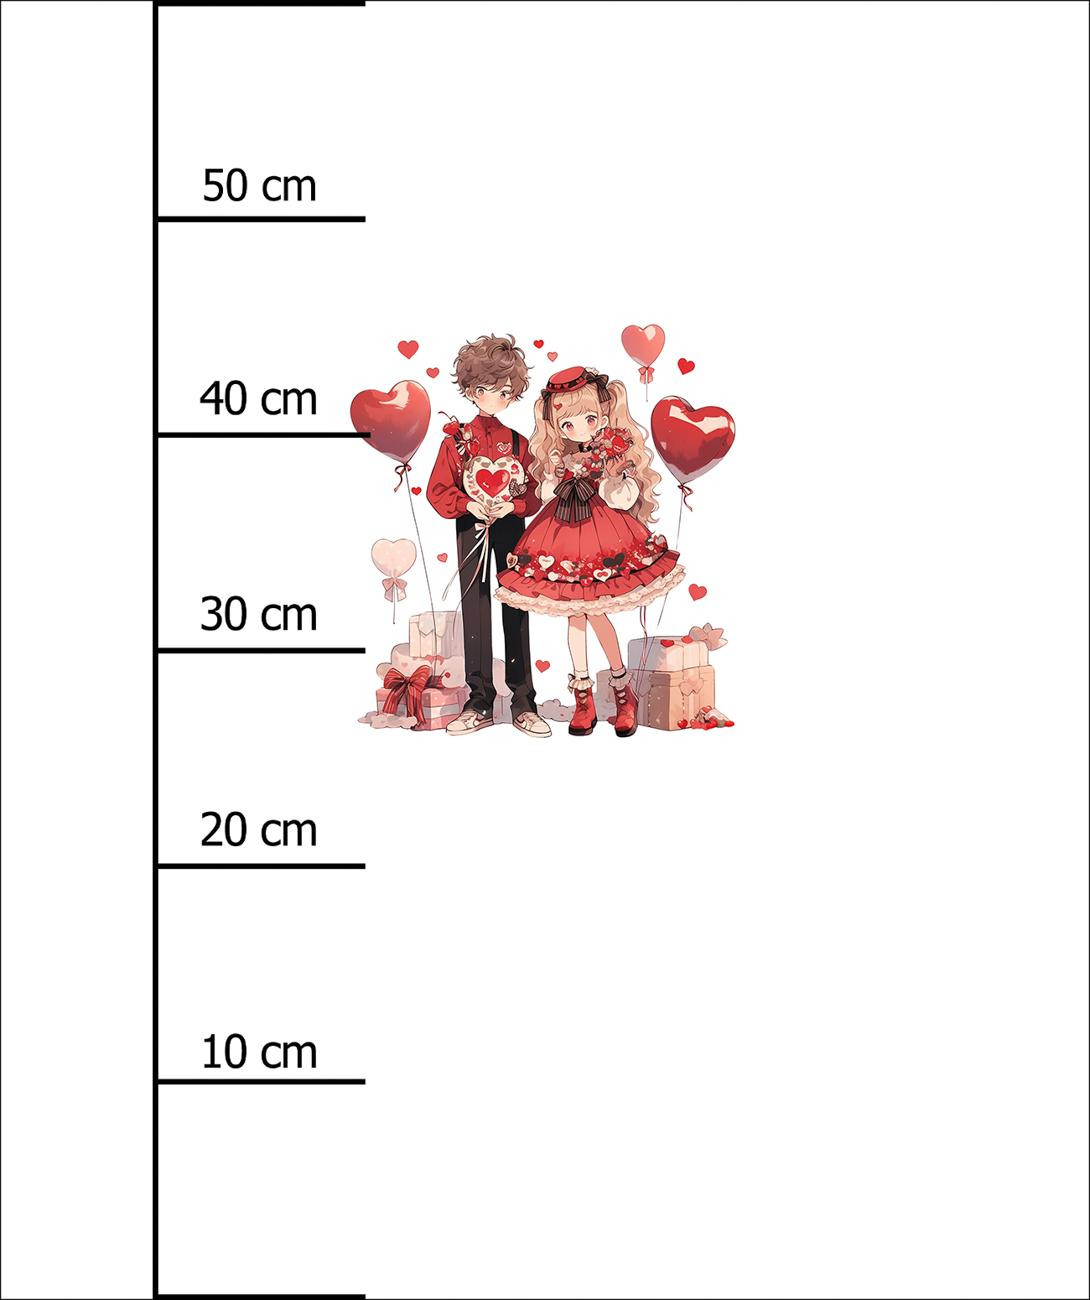 ANIME COUPLE PAT. 1 -  PANEL (60cm x 50cm) brushed knitwear with elastane ITY